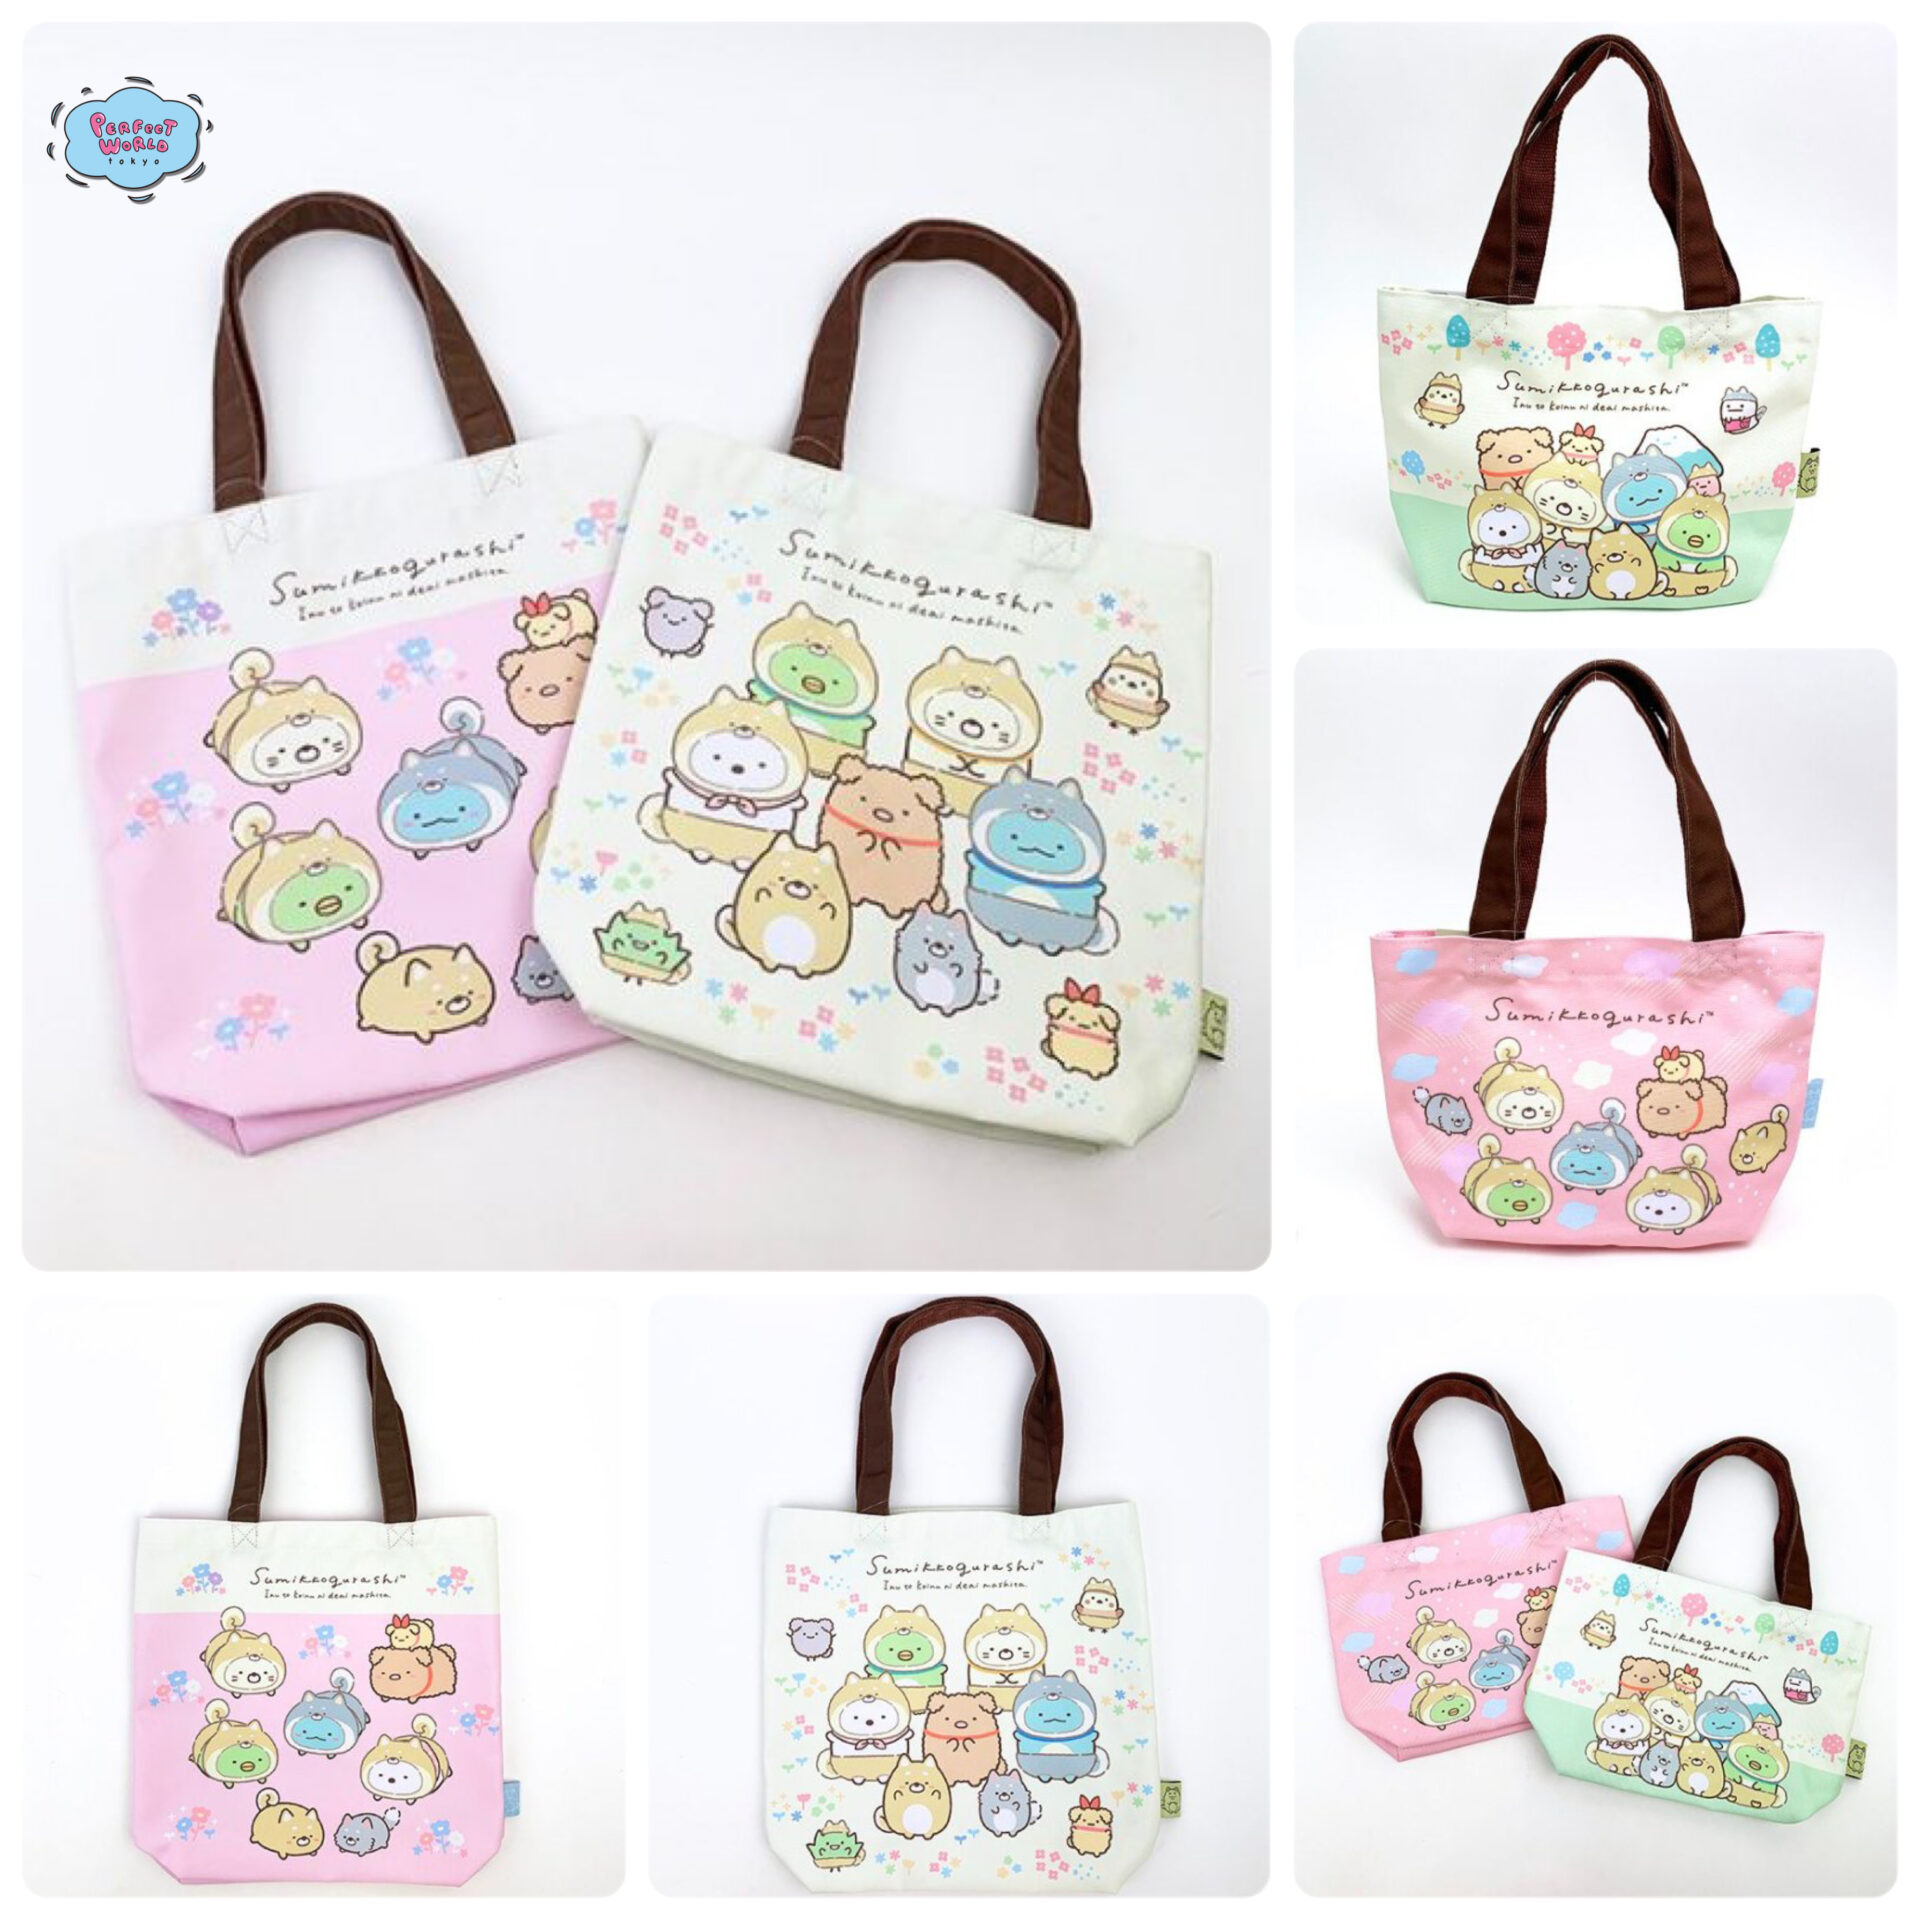 Sumikko Gurashi Tote Bags: All Sumikko characters are so cute, I can’t ...